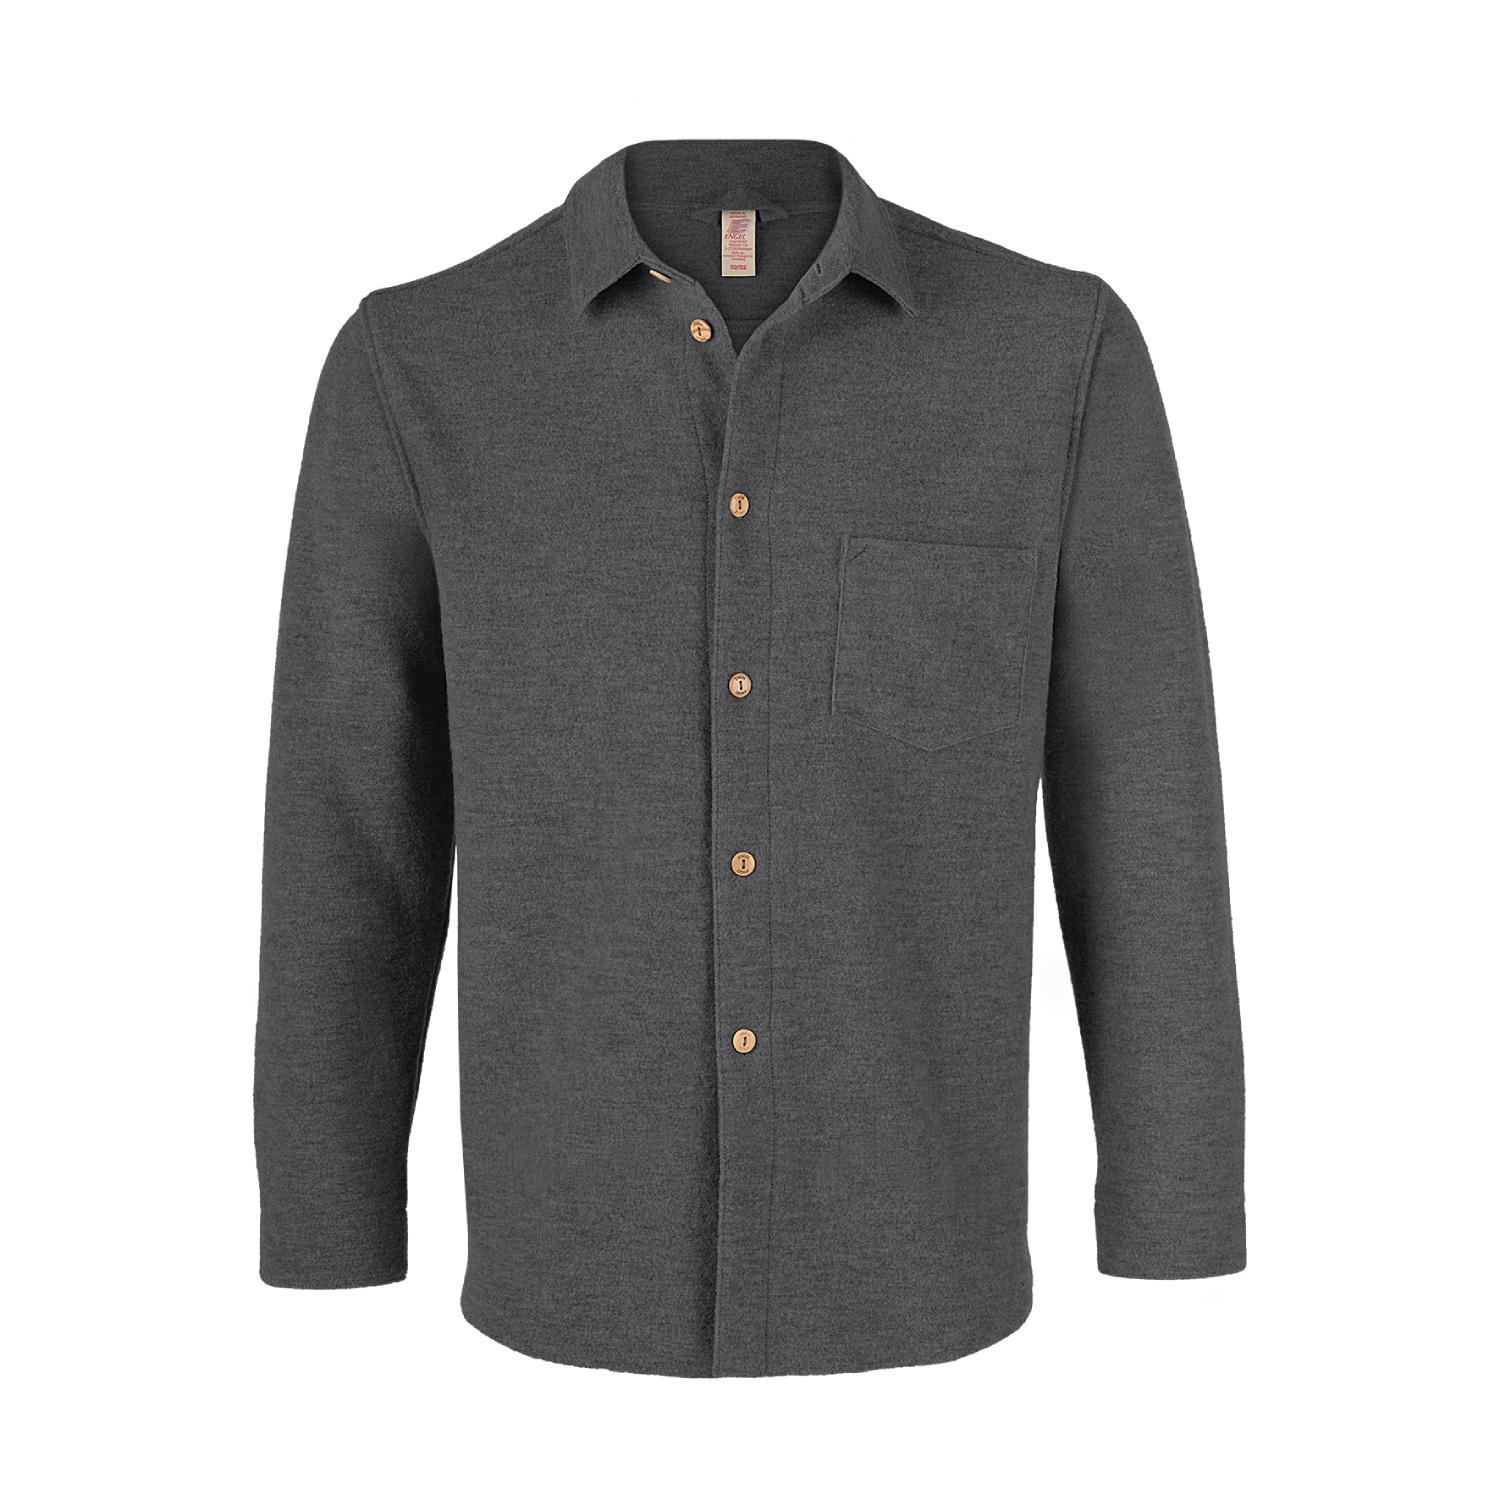 Adult's Shirt in Organic Boiled Merino Wool with Wooden Buttons [594310 ...